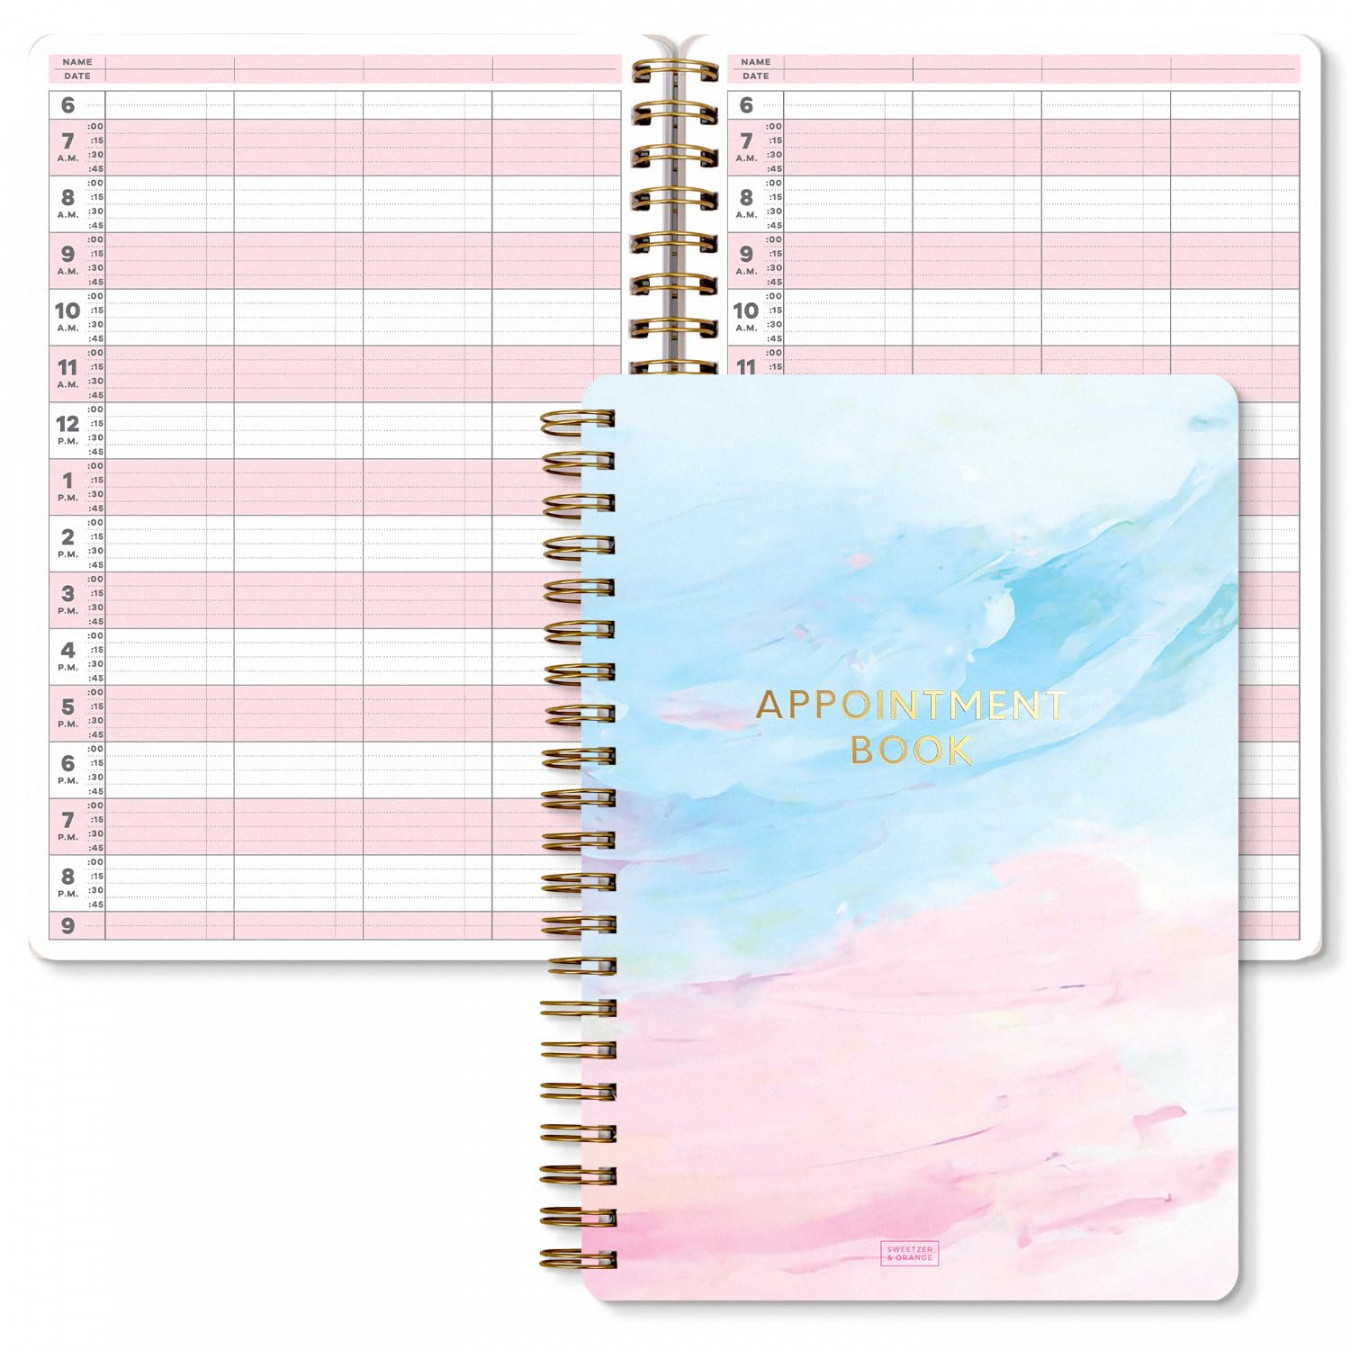 S&O Appointment Book with  Minute Slots - Daily Hourly Planner AM to PM  - Salon Appointment BookSee more S&O Appointment Book with  Minute